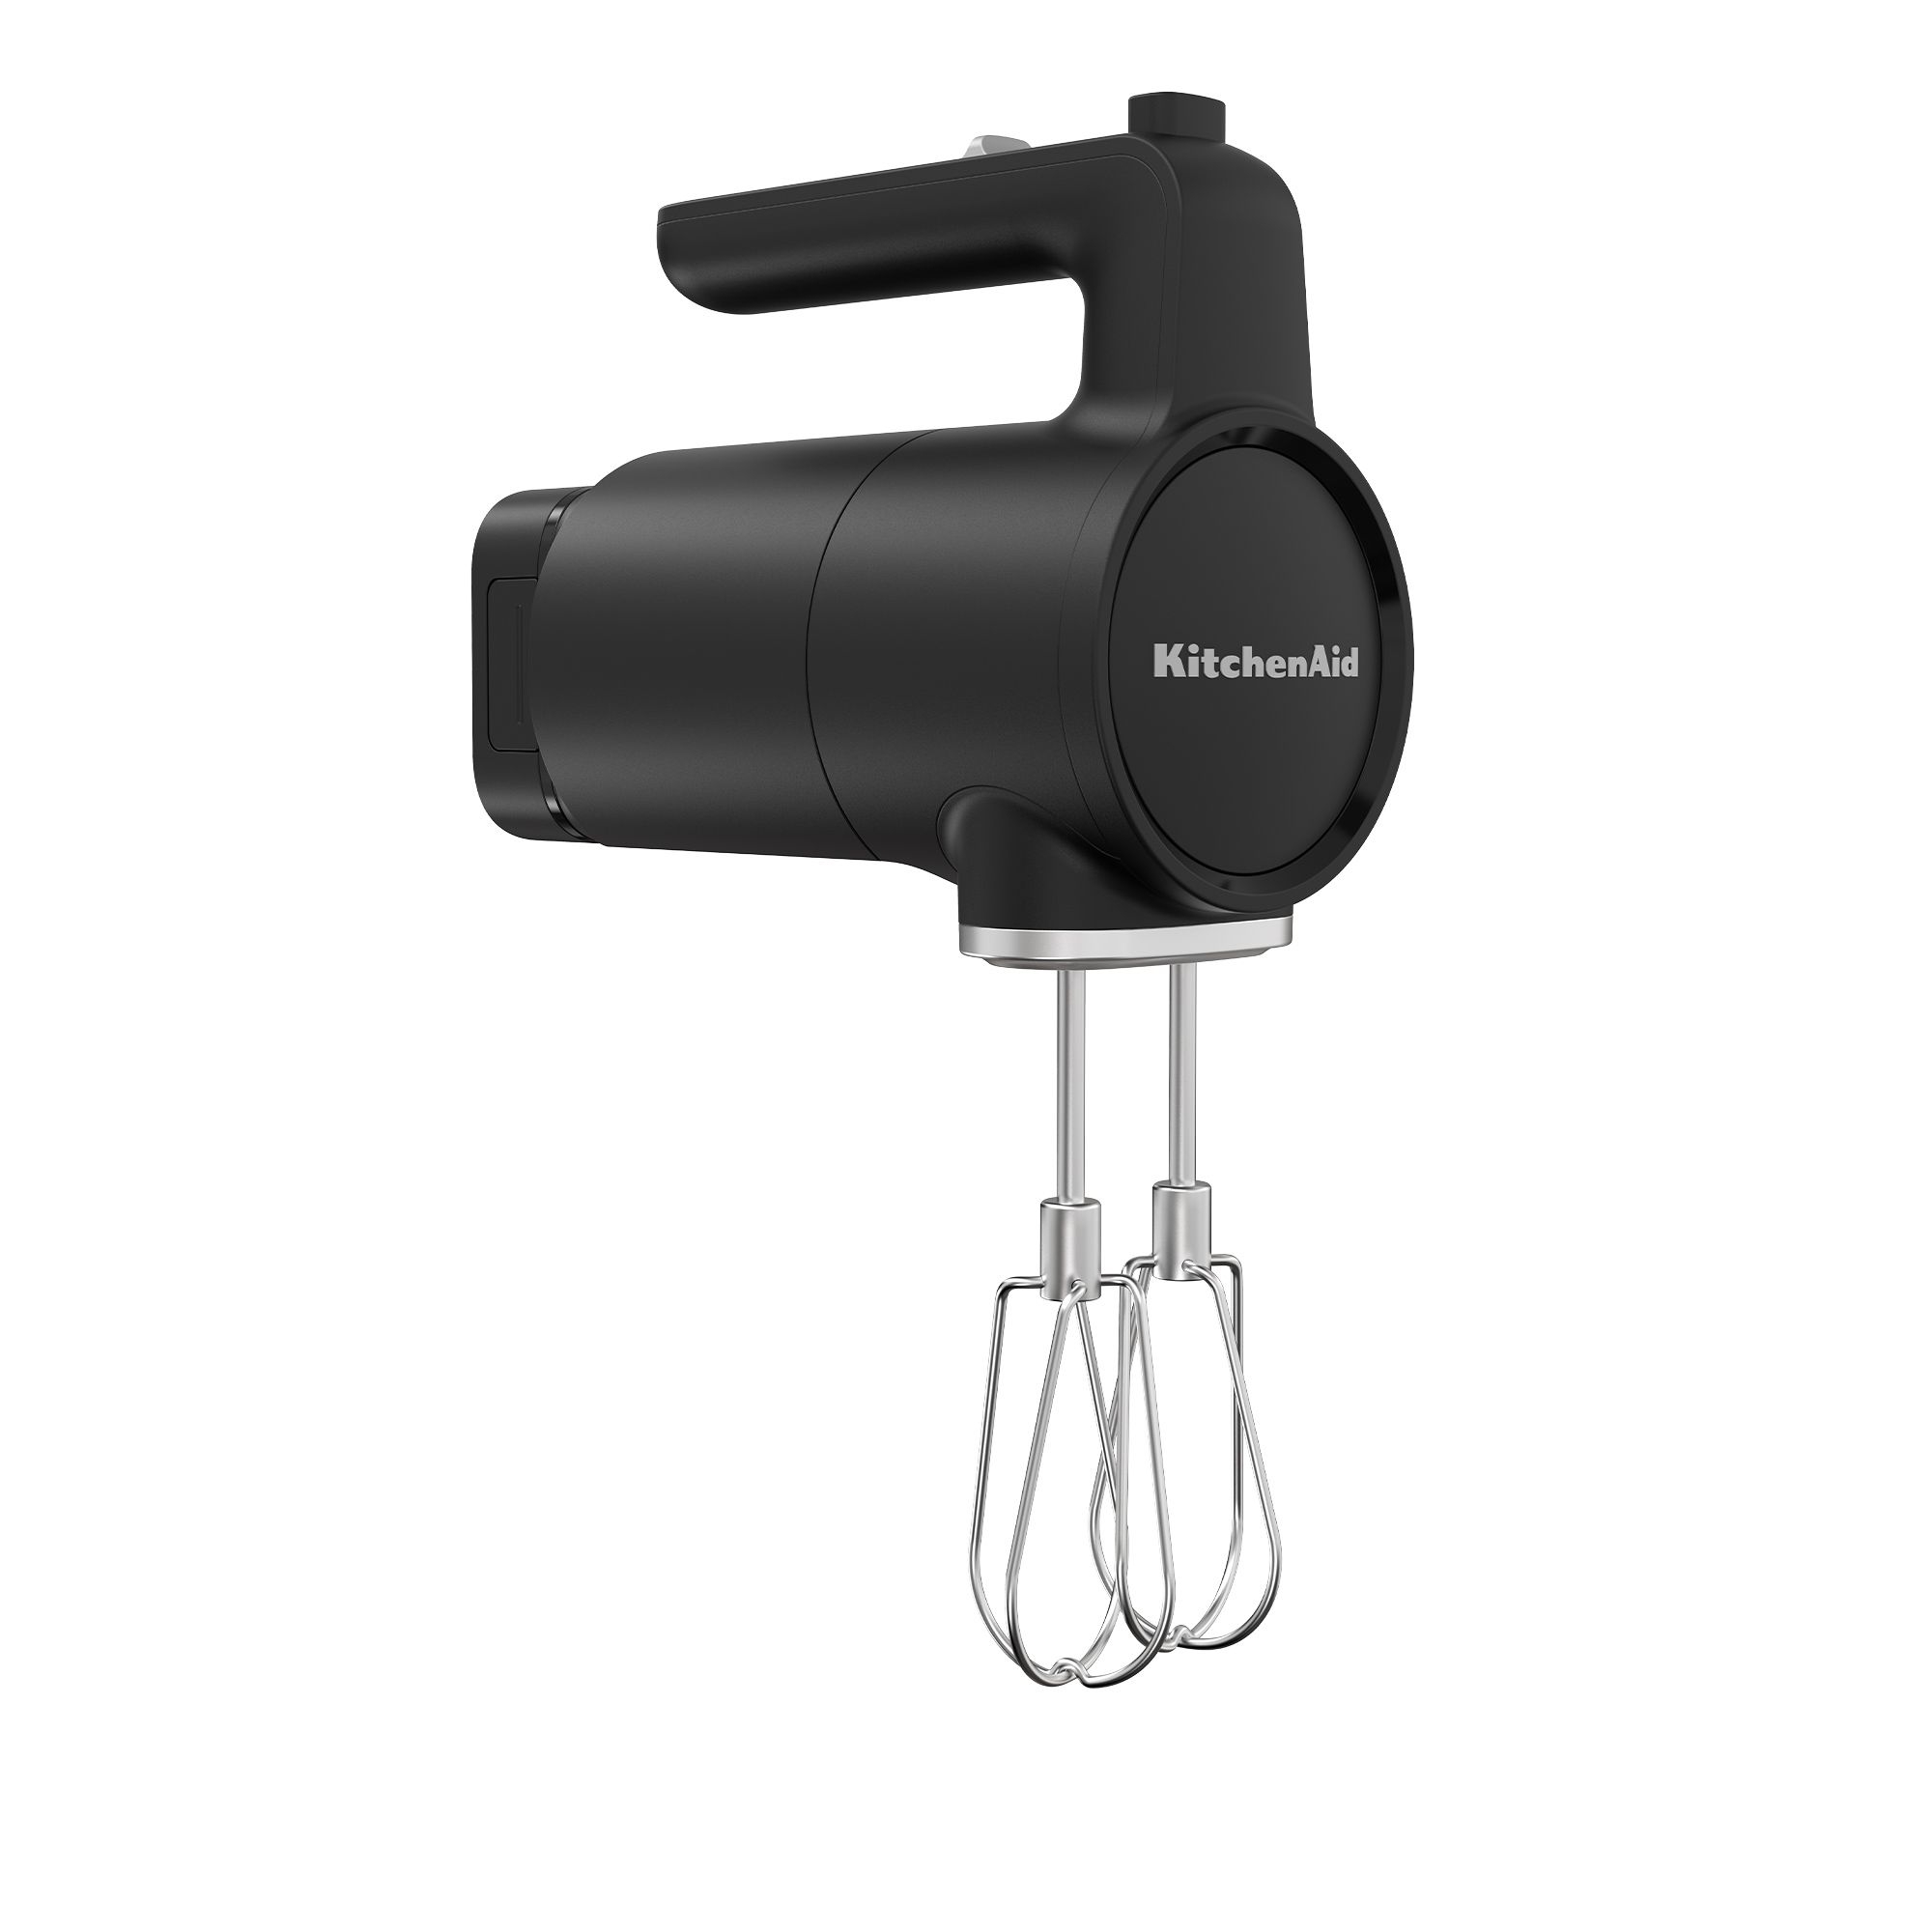 KitchenAid - Go Cordless - Hand mixer - incl. rechargeable battery